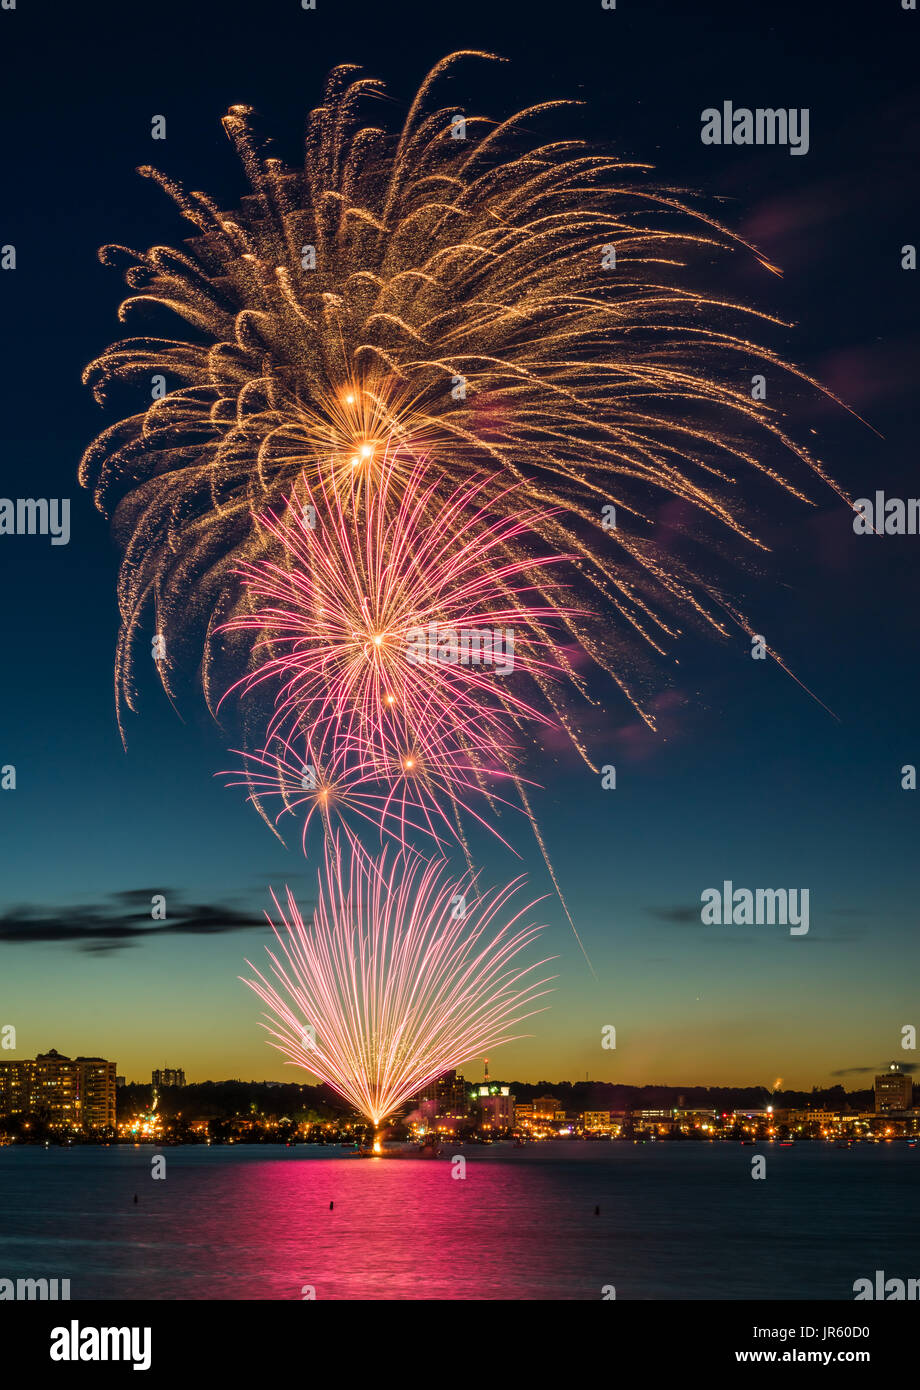 Canada's 150th. anniversary was celebrated by a spectacular fireworks display over Kempenfelt Bay in Barrie, Ontario, Canada on July 1, 2017. Stock Photo